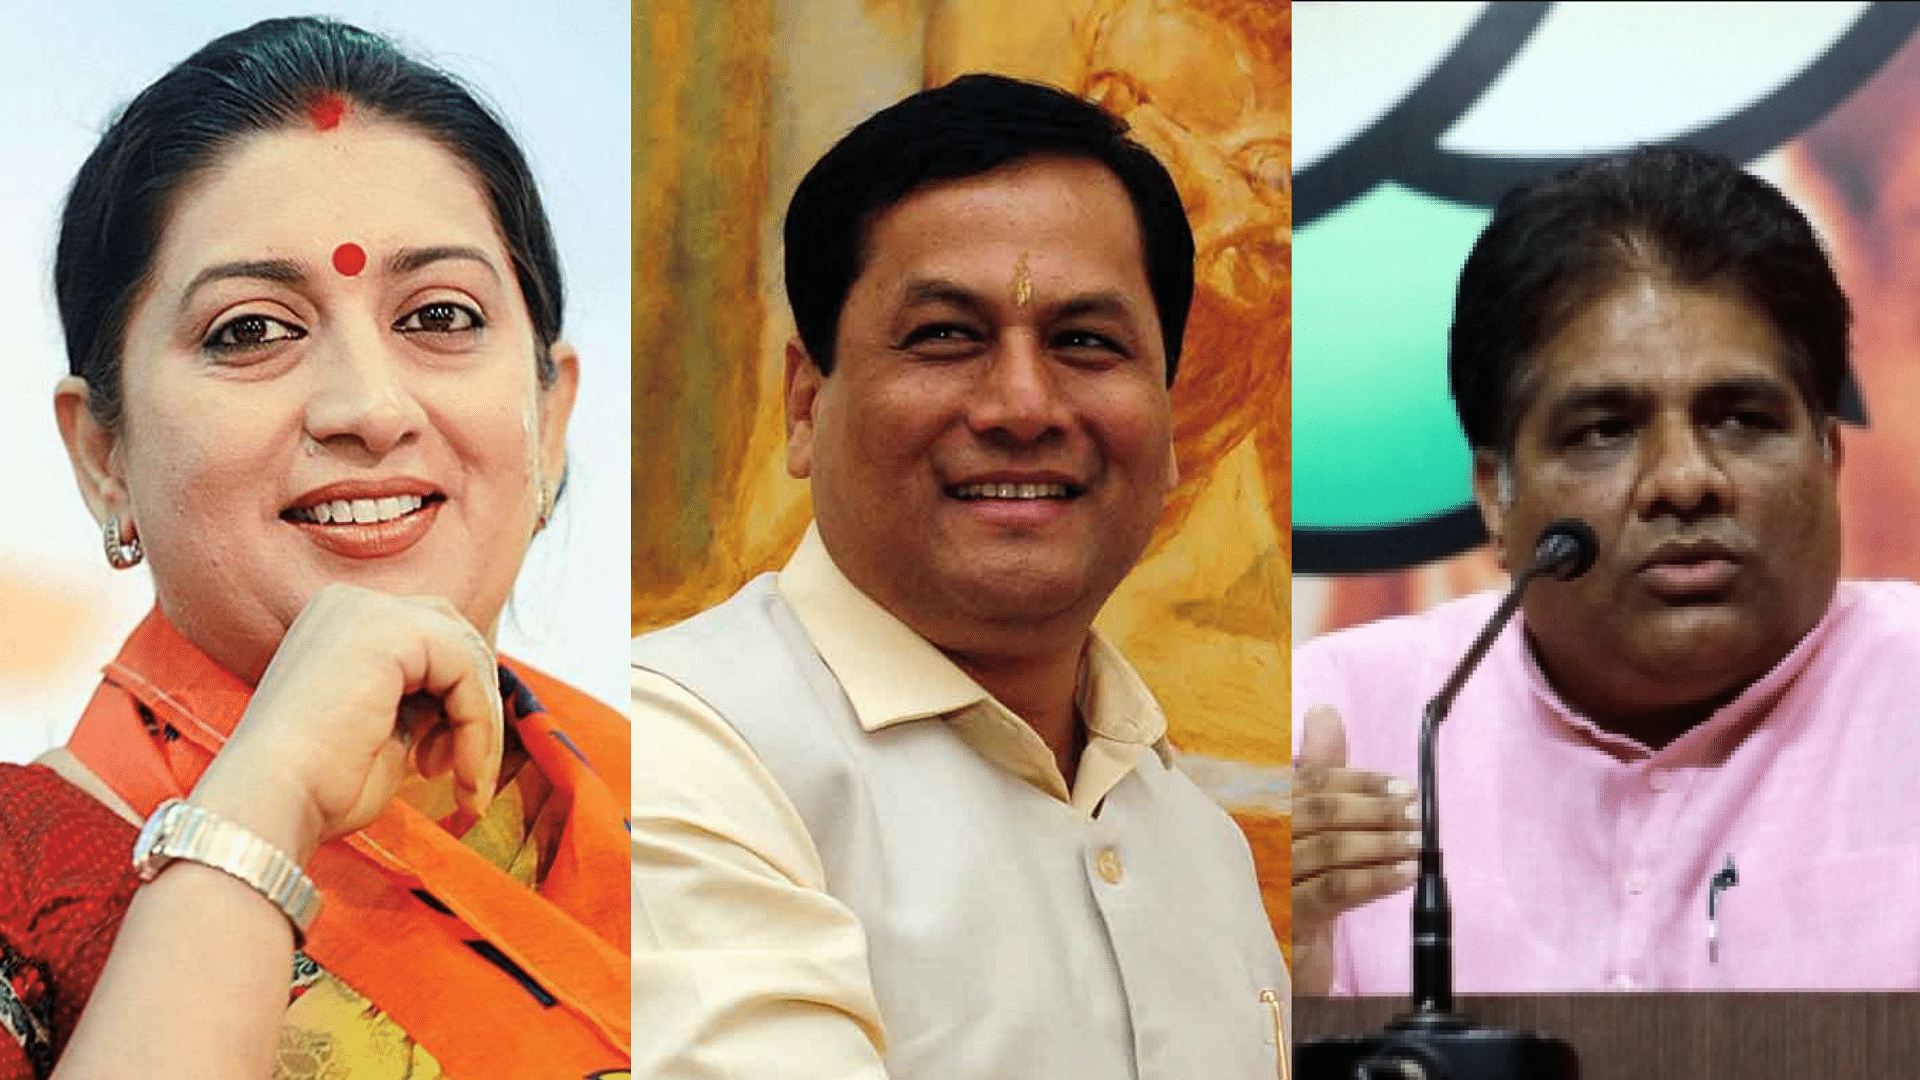 <div class="paragraphs"><p>The Narendra Modi administration on Tuesday, 13 July re-ogranised Cabinet Committees in the country and inducted Environment and Labour Minister Bhupender Yadav, Union Minister for Woman and Child Development, Smriti Irani, Ports Minister Sarbananda Sonowal in the crucial Cabinet Committee on Political Affairs (CCPA).</p><p><br></p></div>